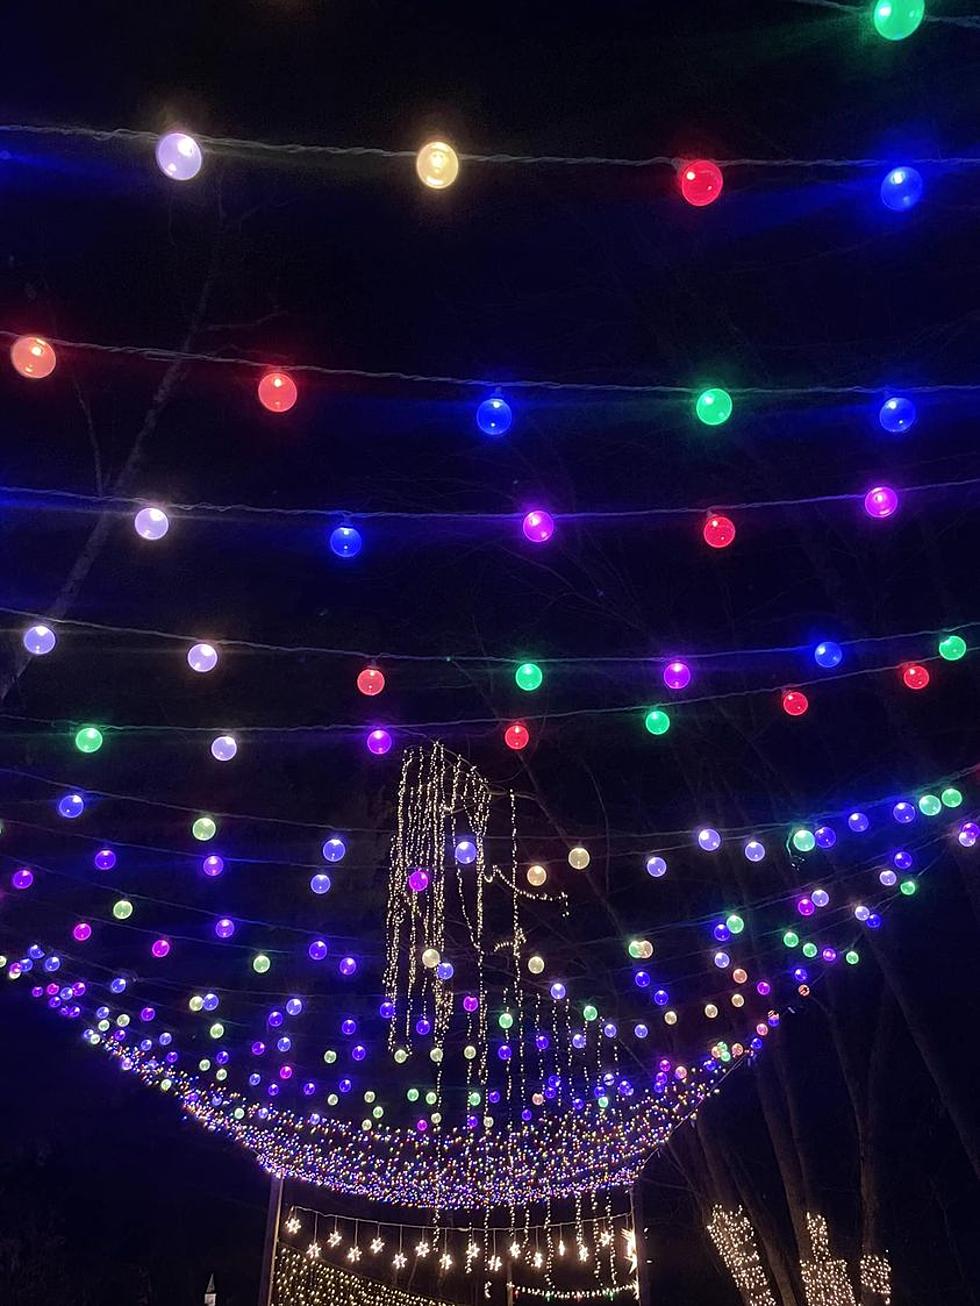 Stillwater Lights Walking Display To Open In Orono This Weekend